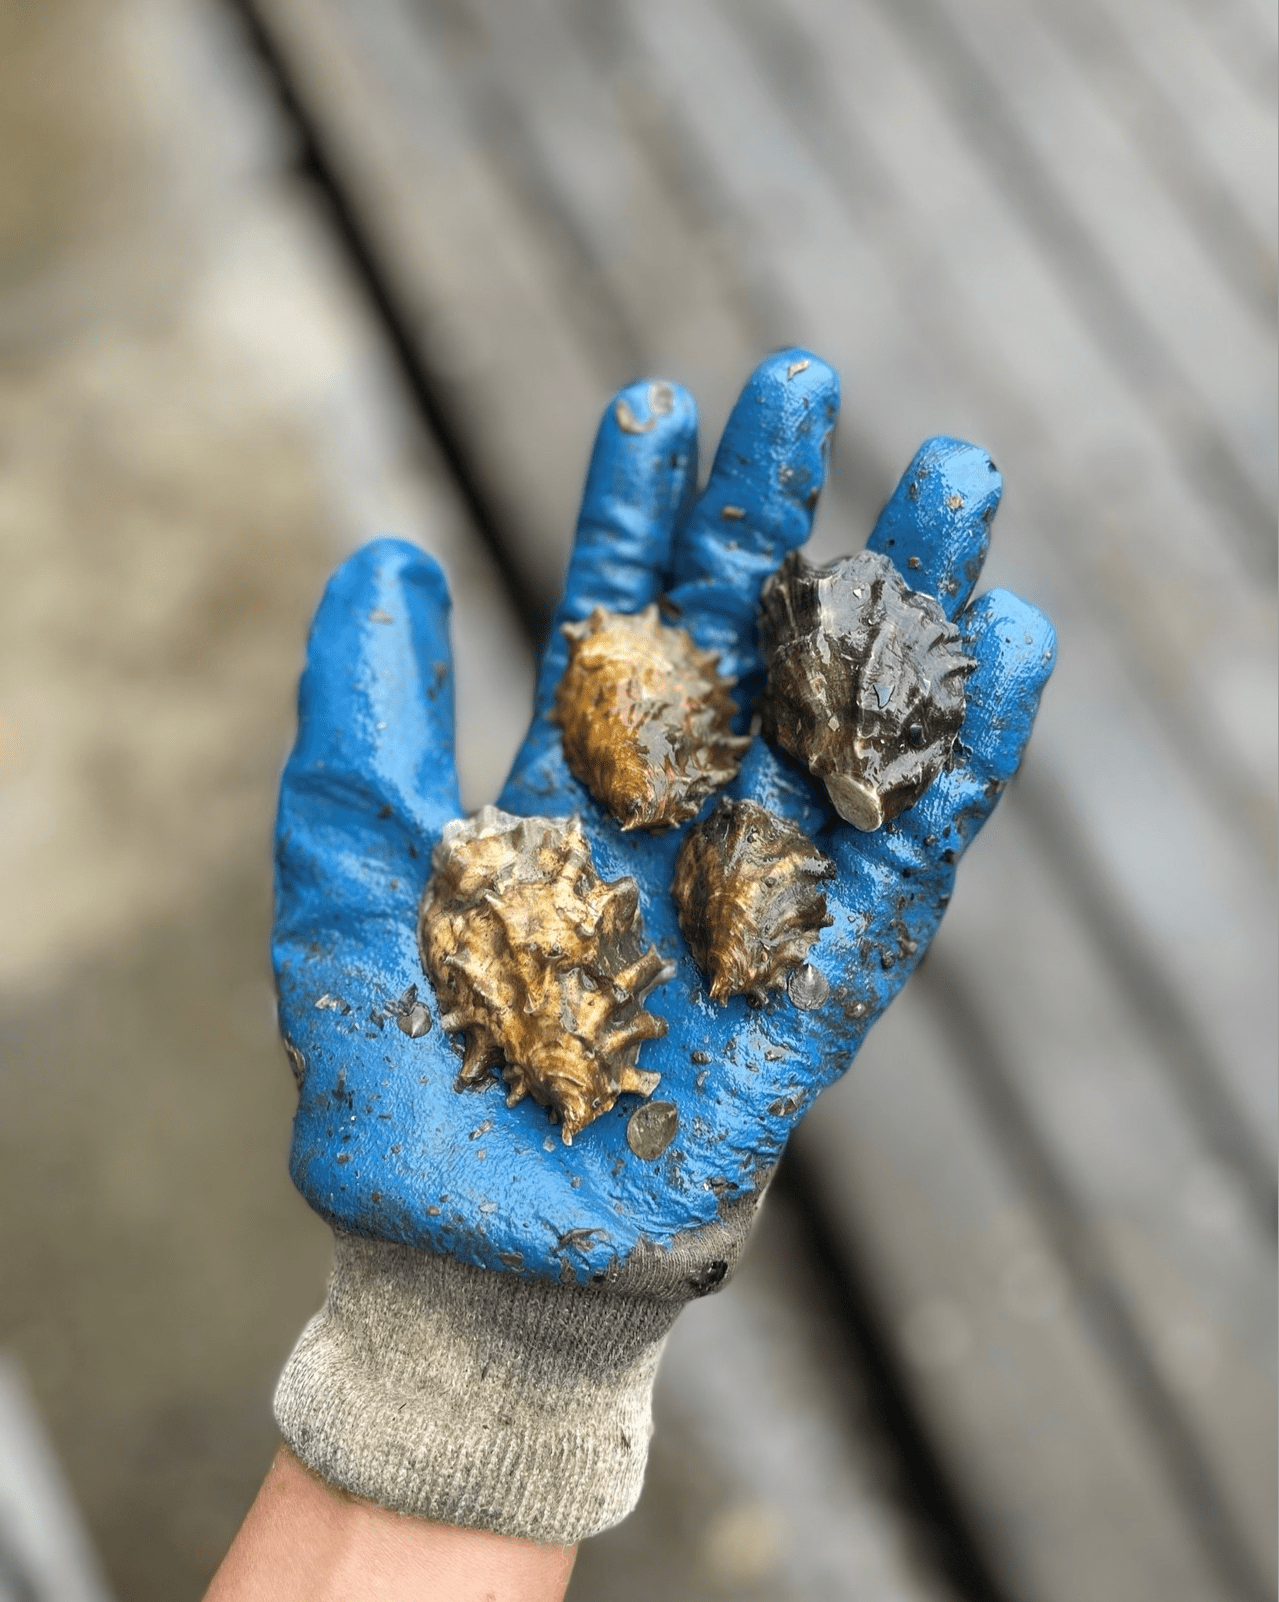 Gloved hand holding farmed oysters on a boat